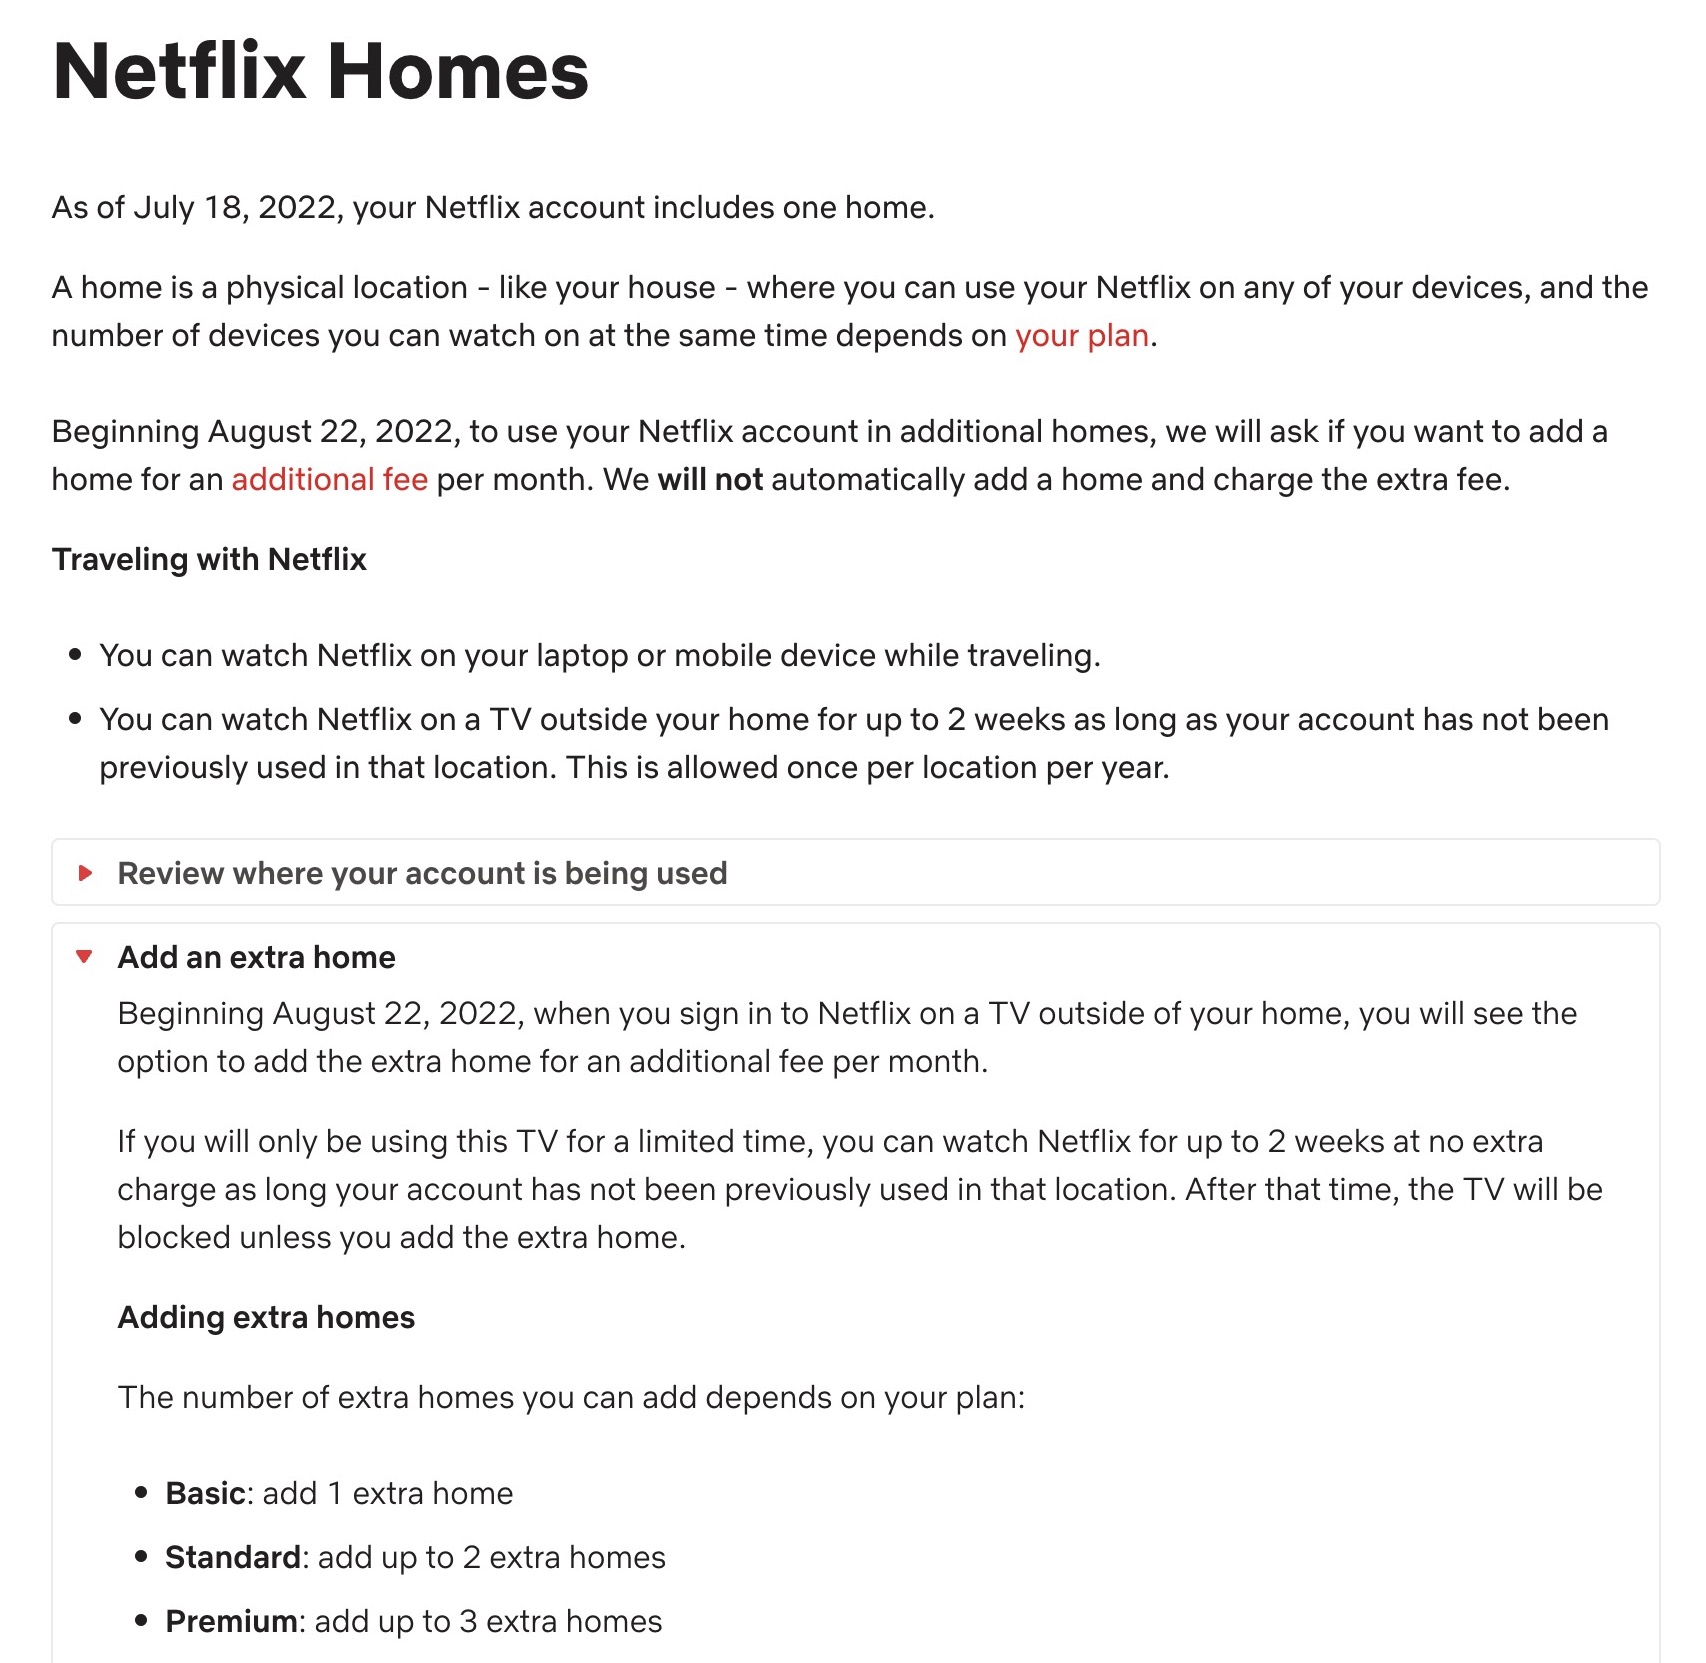 Update on Sharing - About Netflix